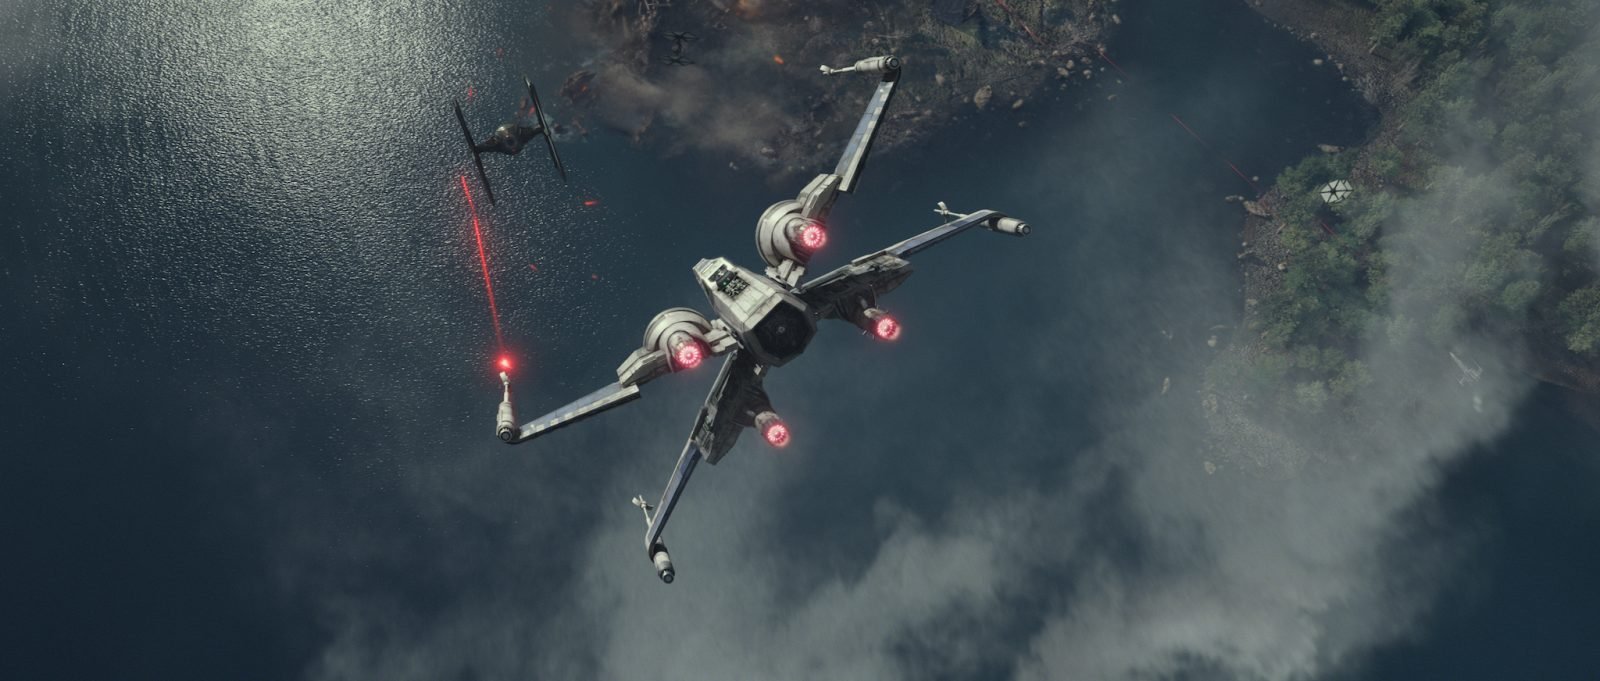 Star Wars VII The Force Awakens 6 - X-Wing shoots Tie Fighter